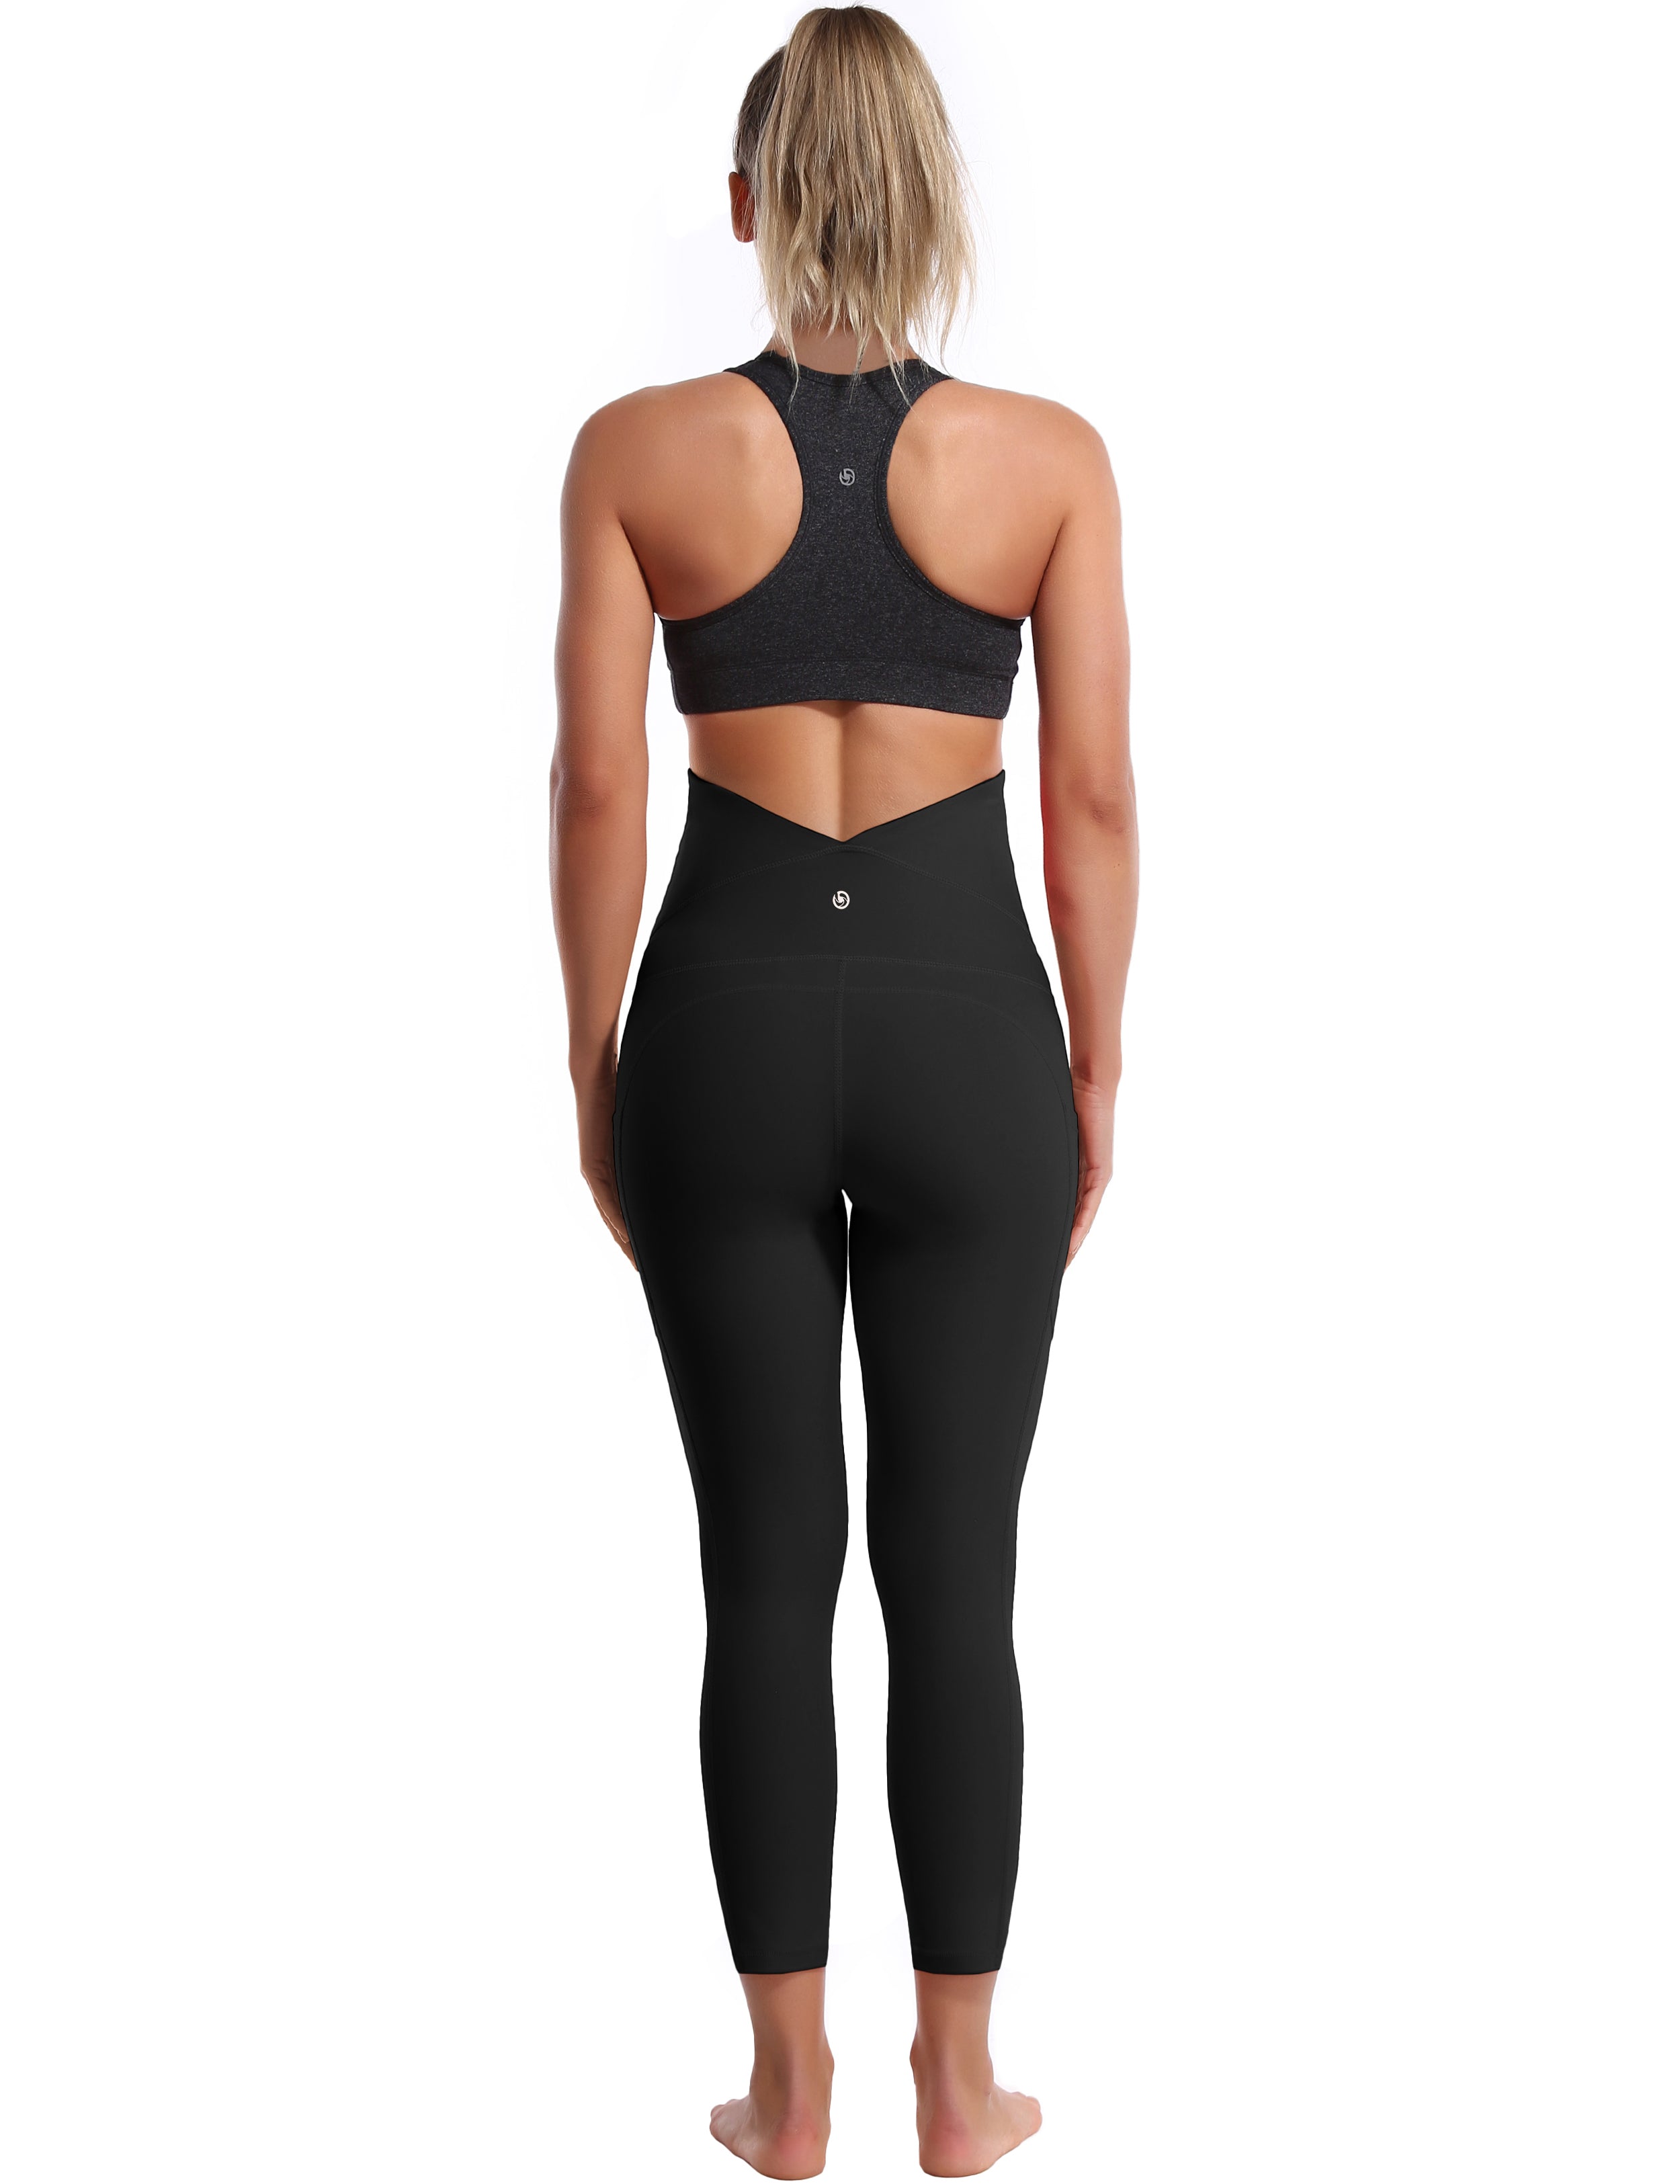 22" Side Pockets Maternity Yoga Pants black 87%Nylon/13%Spandex Softest-ever fabric High elasticity 4-way stretch Fabric doesn't attract lint easily No see-through Moisture-wicking Machine wash